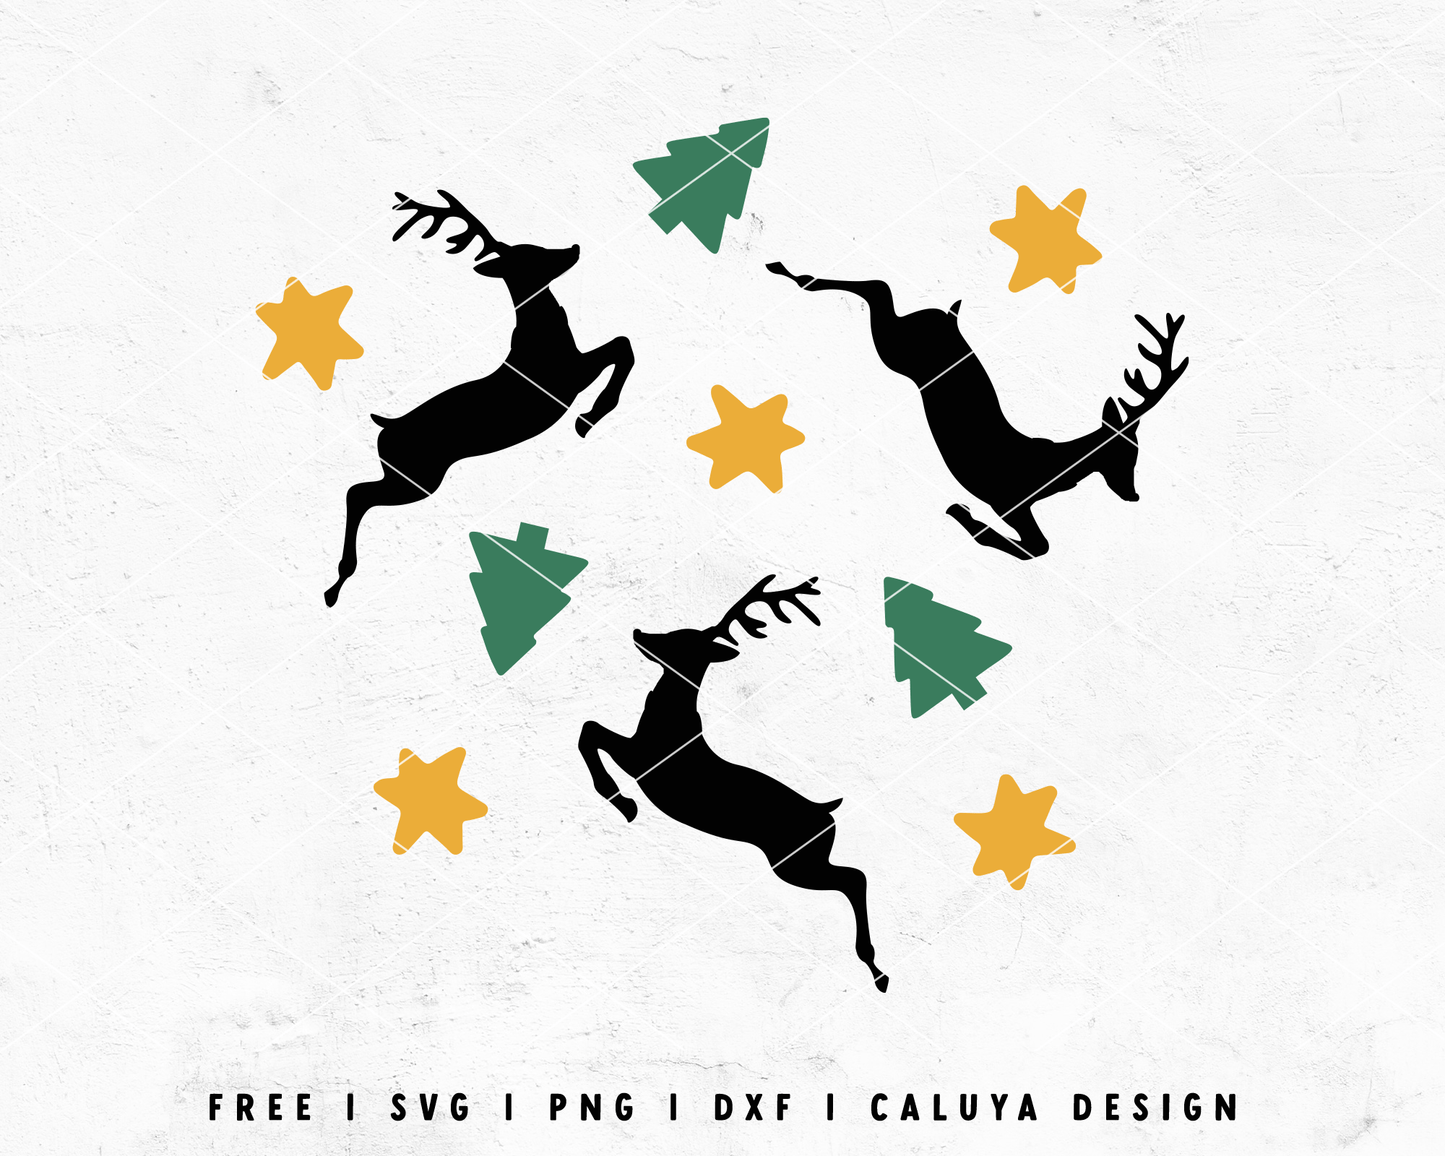 FREE Reindeer SVG | Classic Christmas SVG Cut File for Cricut, Cameo Silhouette | Free SVG Cut File